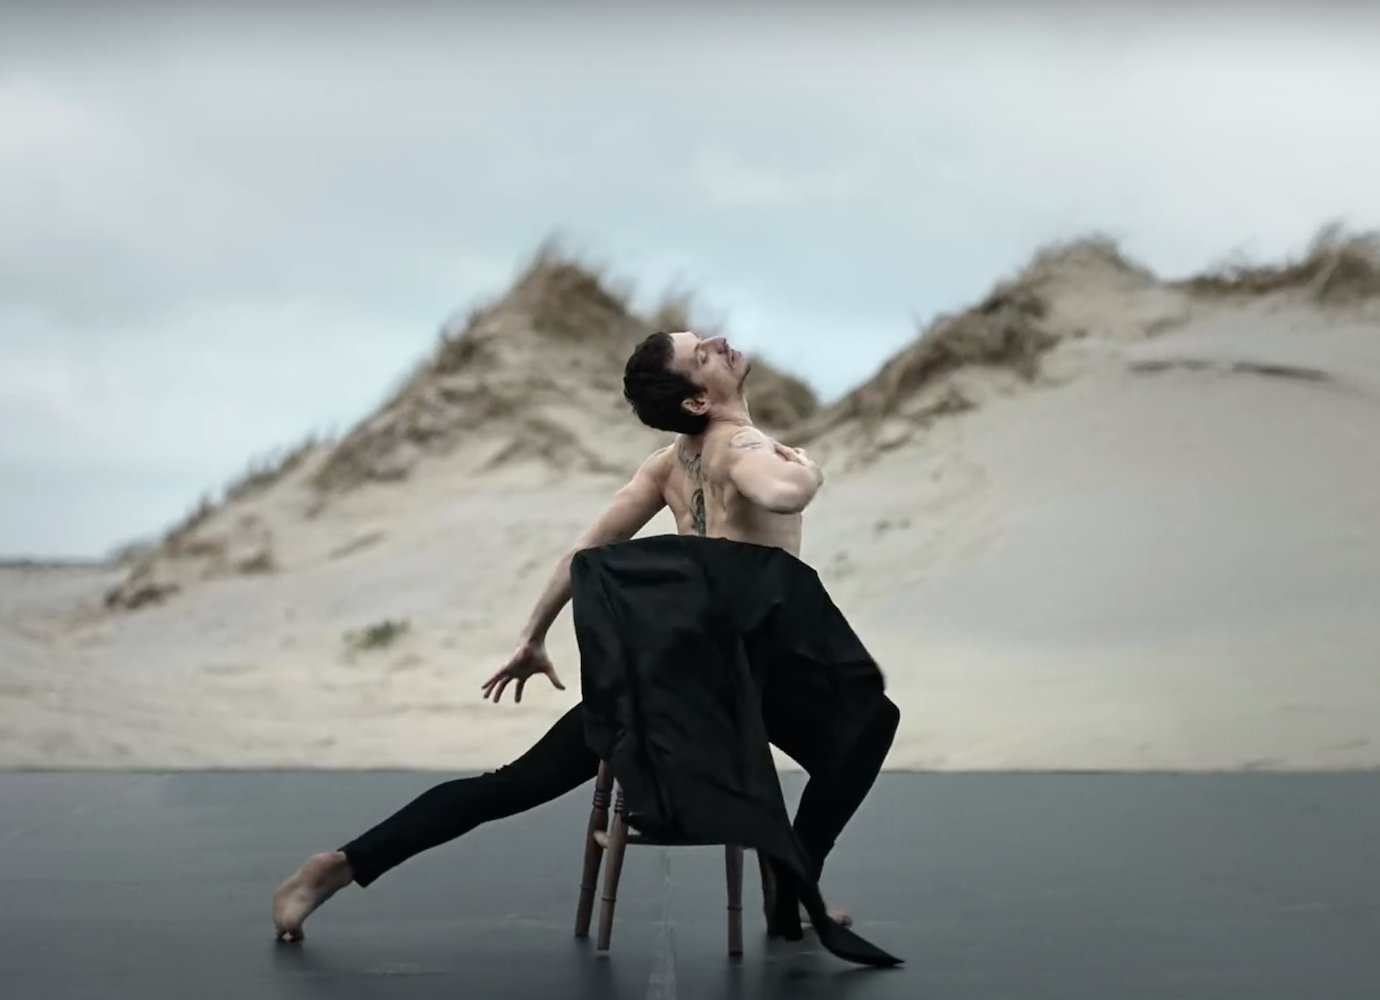 Sergei Polunin returns to the screen with new clip dancing to Depeche Mode